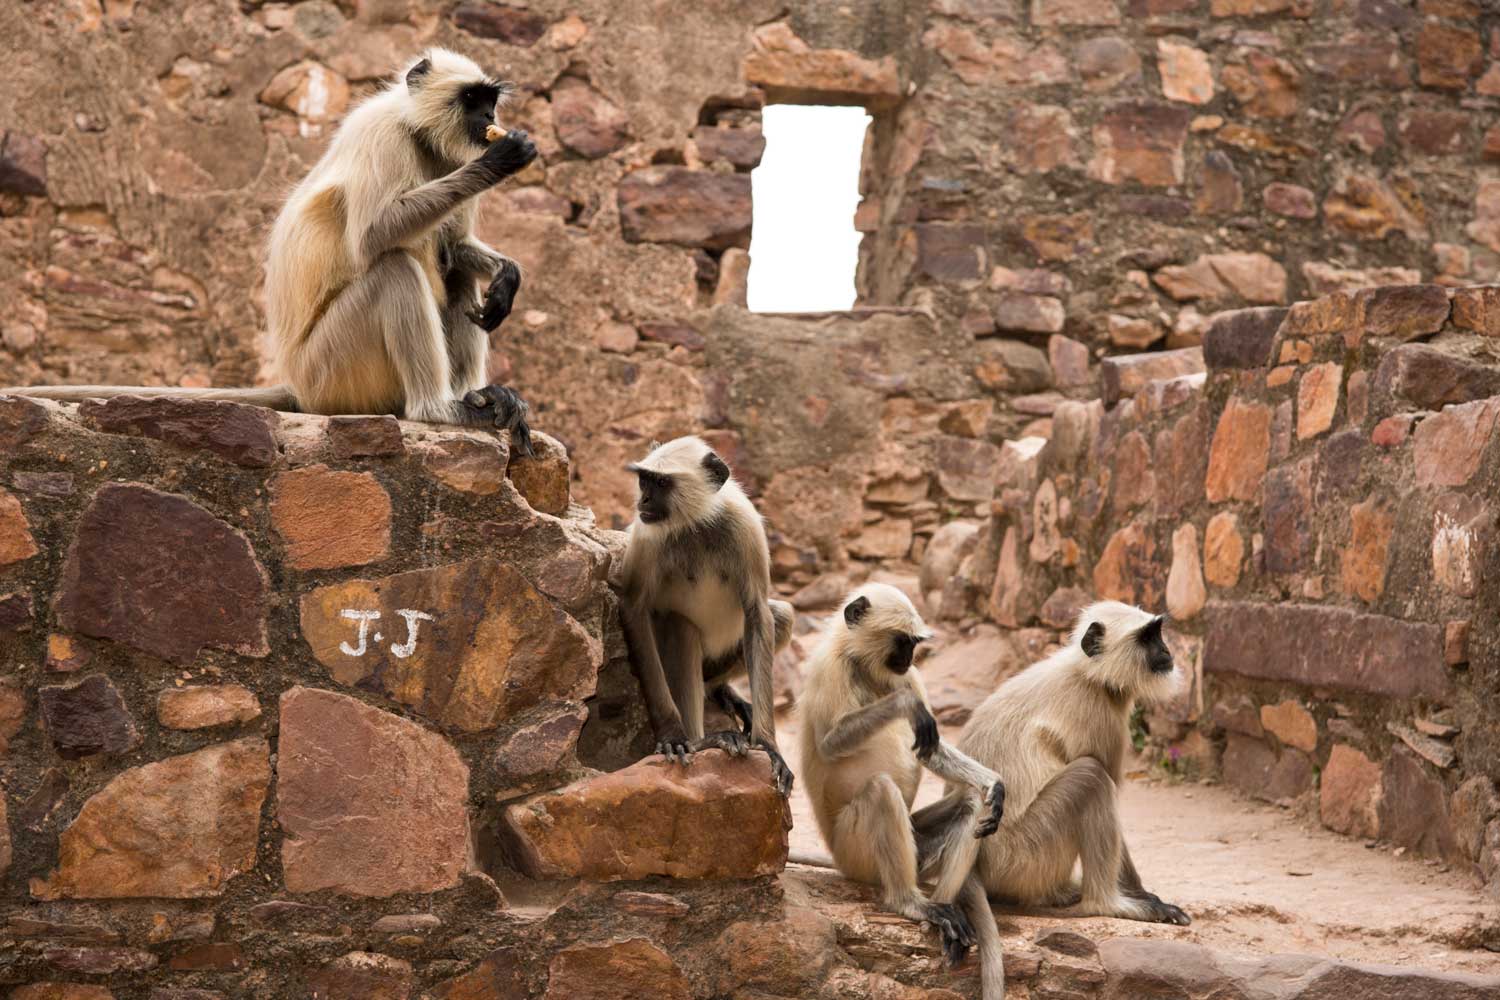 A group of four langurs sitting on stone stairs with a stone wall and window in the background.